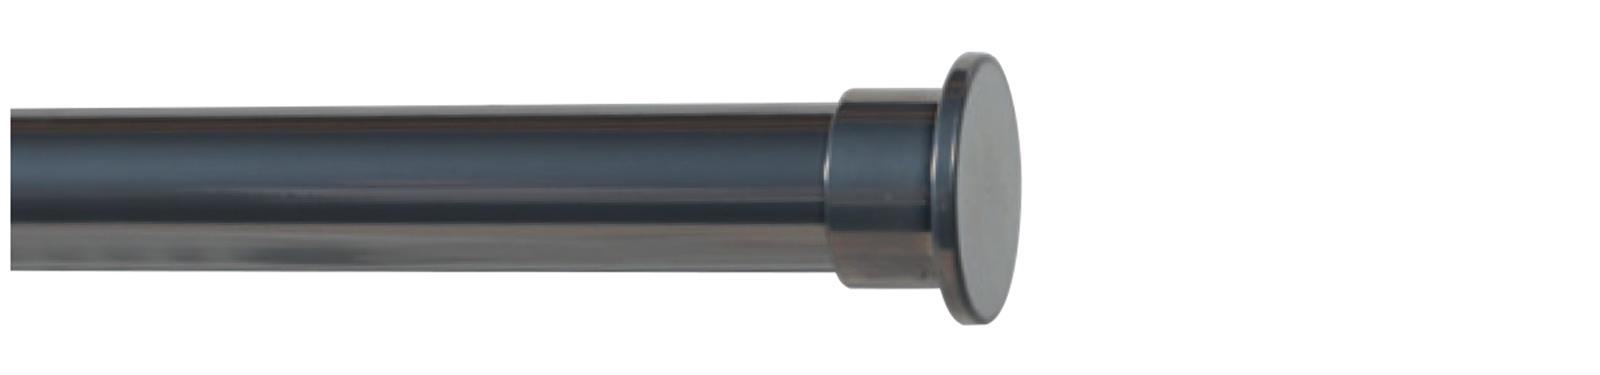 Cameron Fuller 32mm Metal Curtain Pole Graphite Stopper